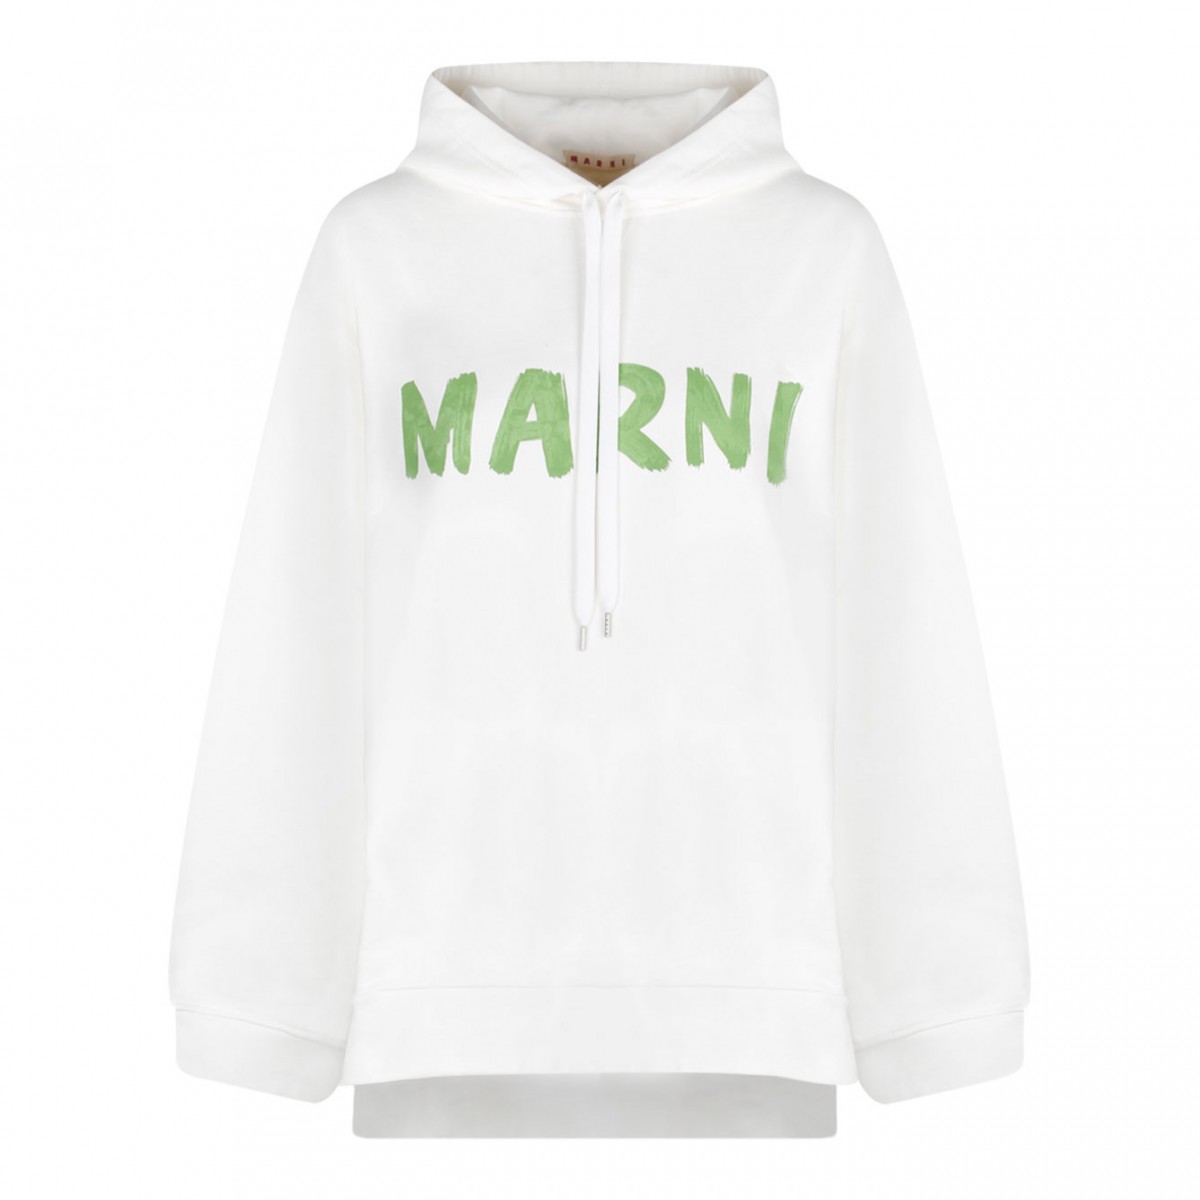 White and Light Green Cotton Hoodie